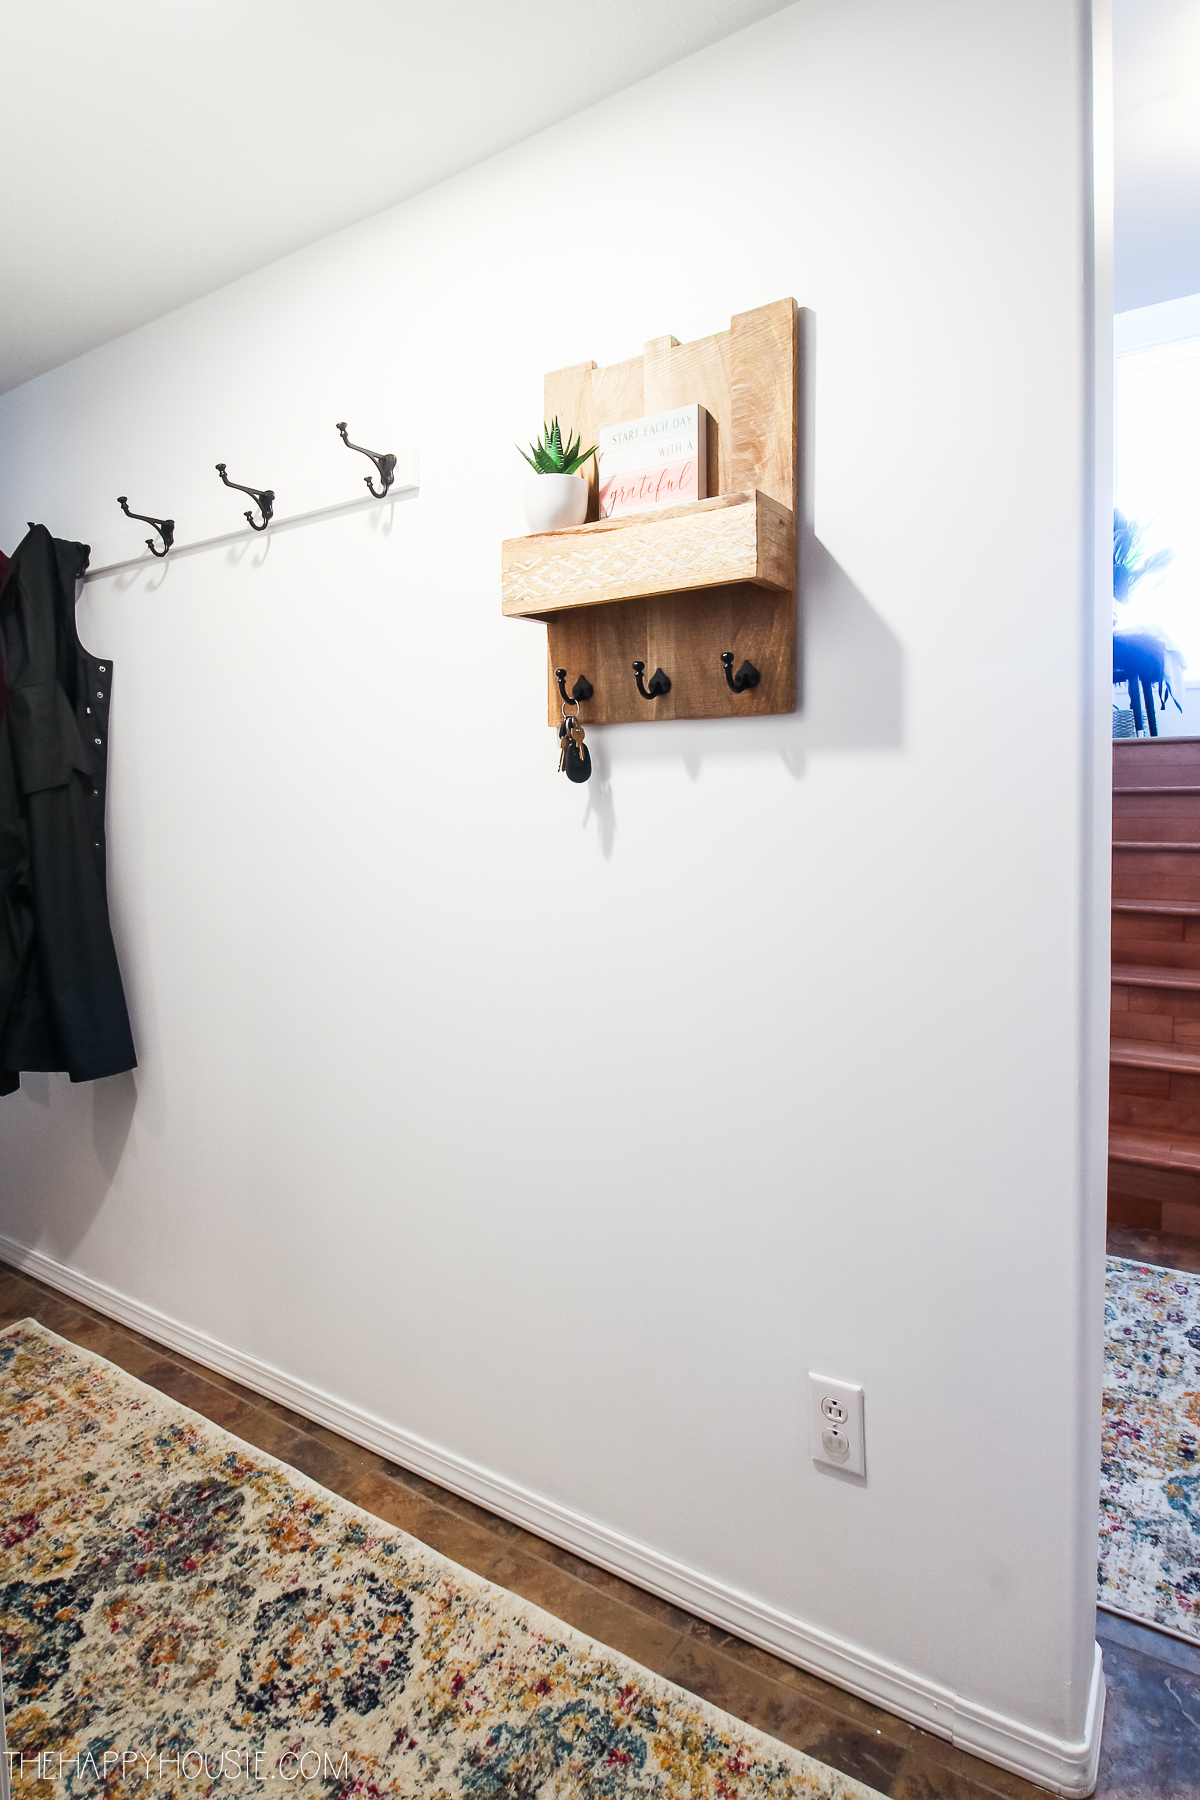 A small wooden key shelf is on the wall.